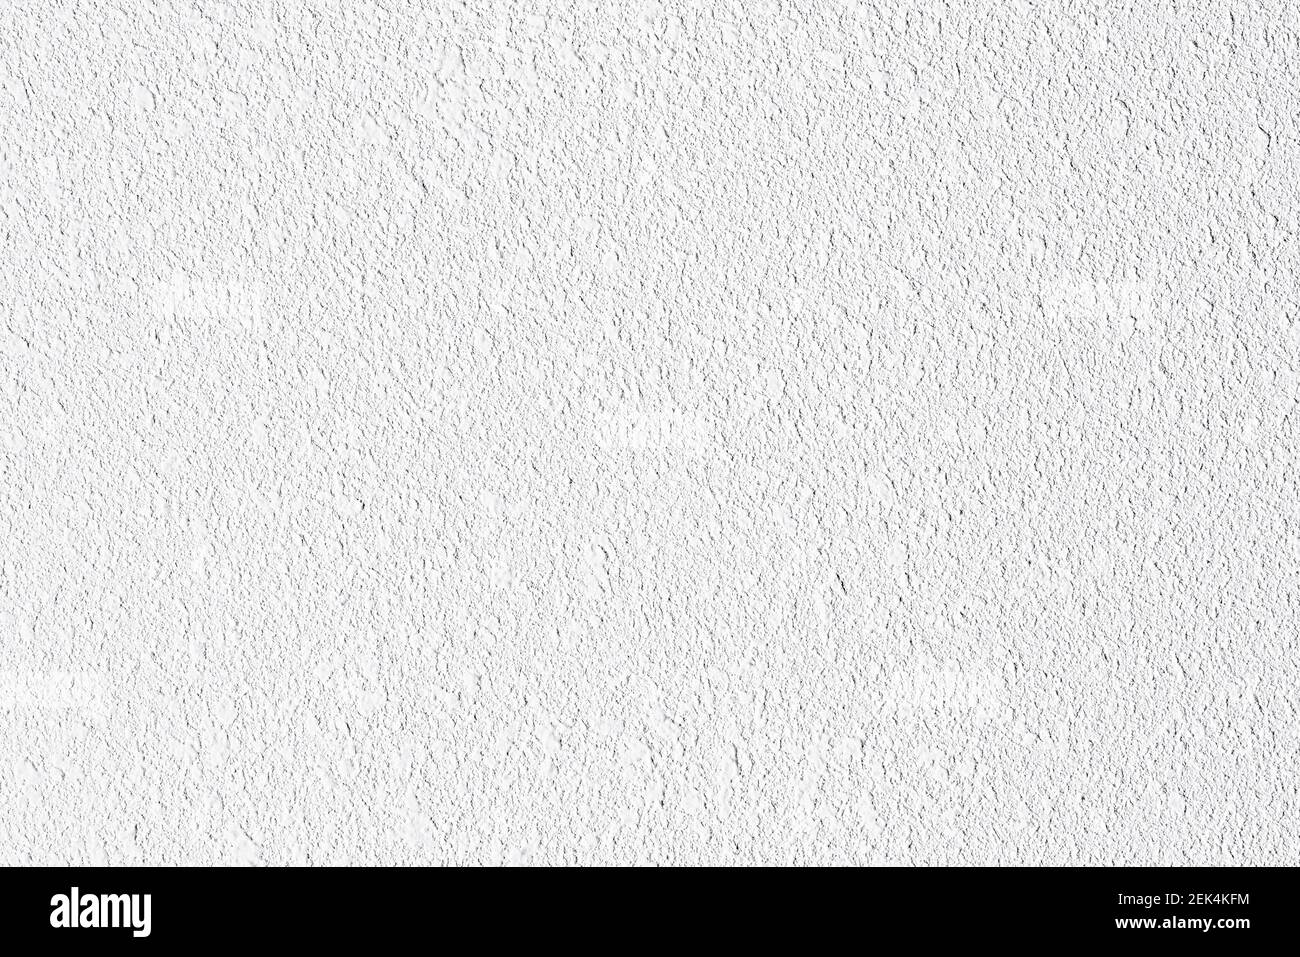 Rough grainy white paint structure background. Grungy light grey texture. Rugged urban pattern for cool abstract effect. Granular grunge surface. Stock Photo